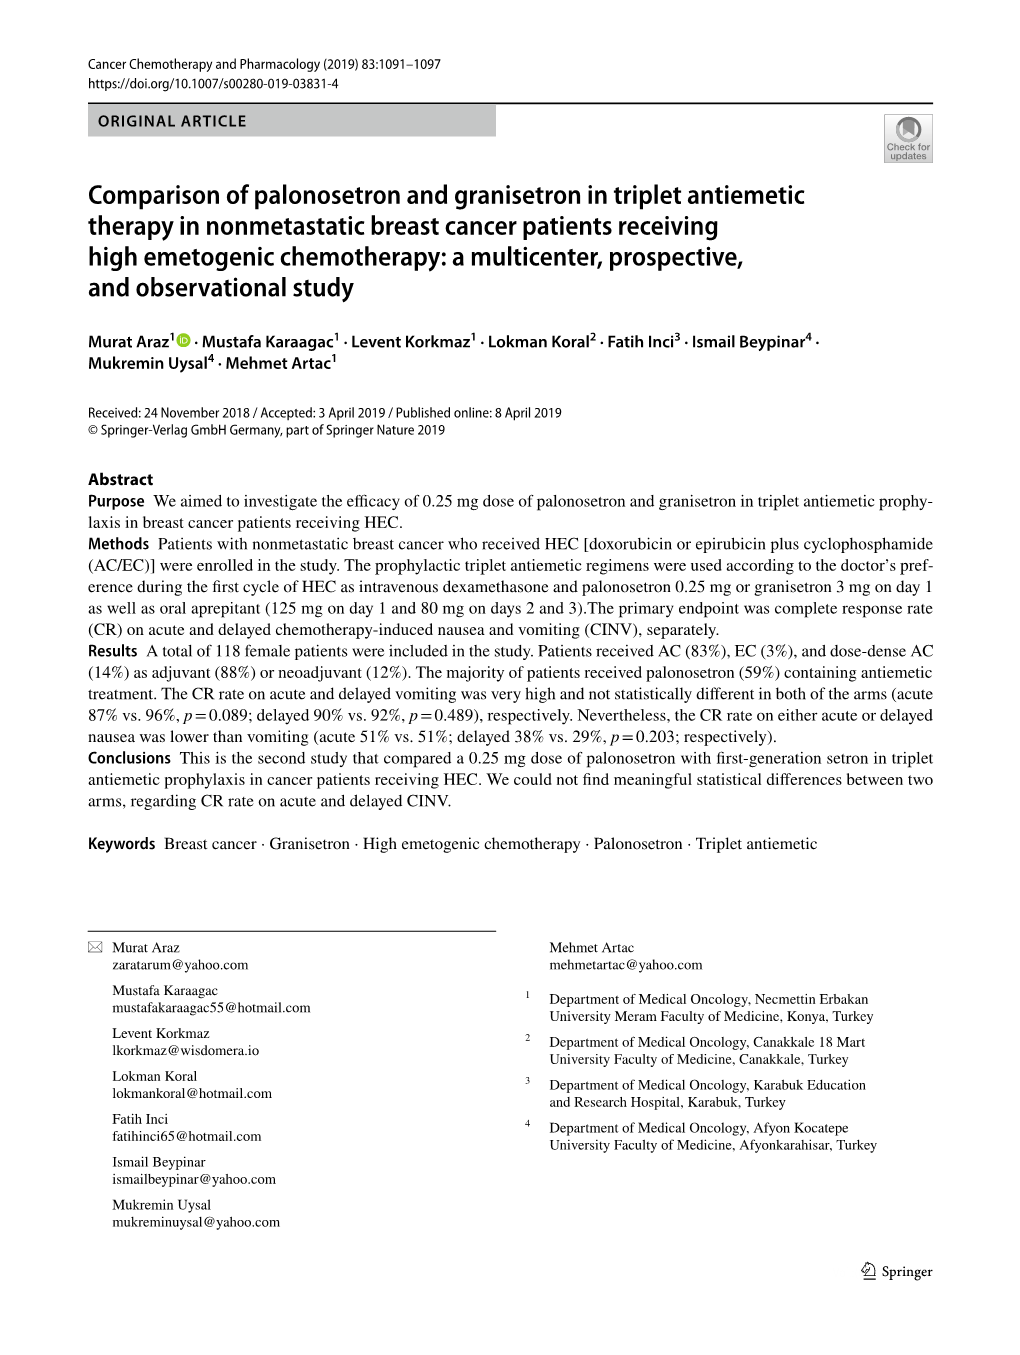 Comparison of Palonosetron and Granisetron in Triplet Antiemetic Therapy in Nonmetastatic Breast Cancer Patients Receiving High